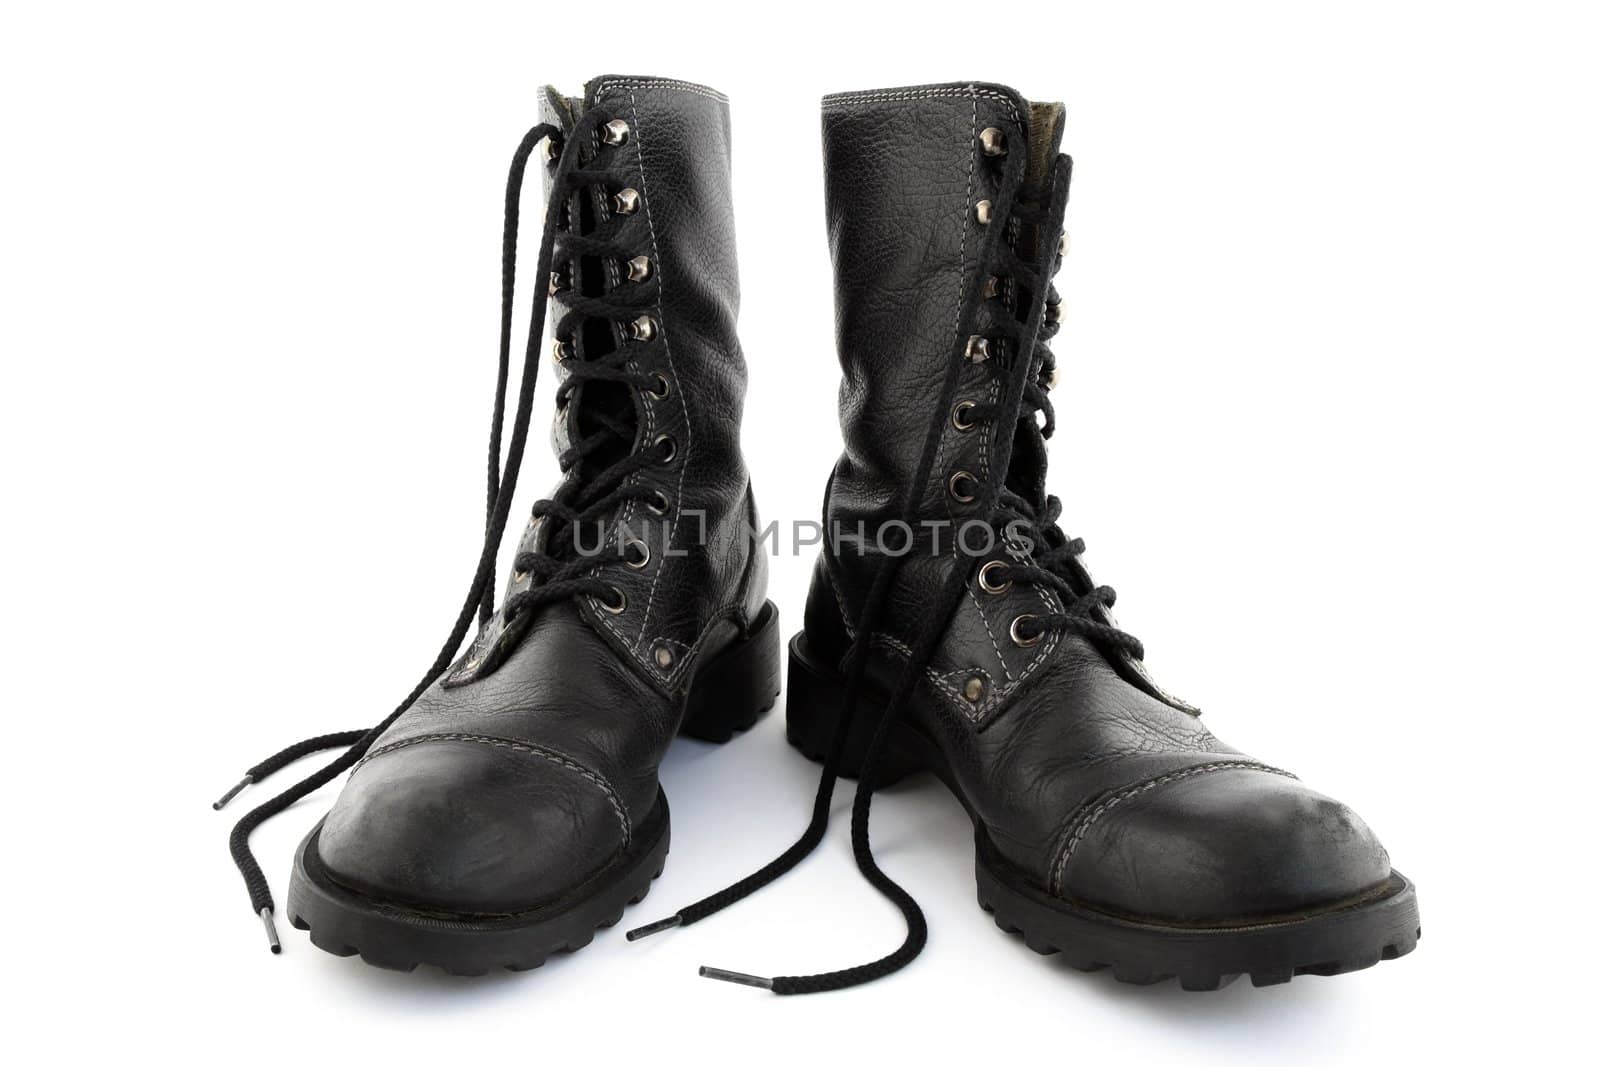 Army style black leather boots with laces by anikasalsera